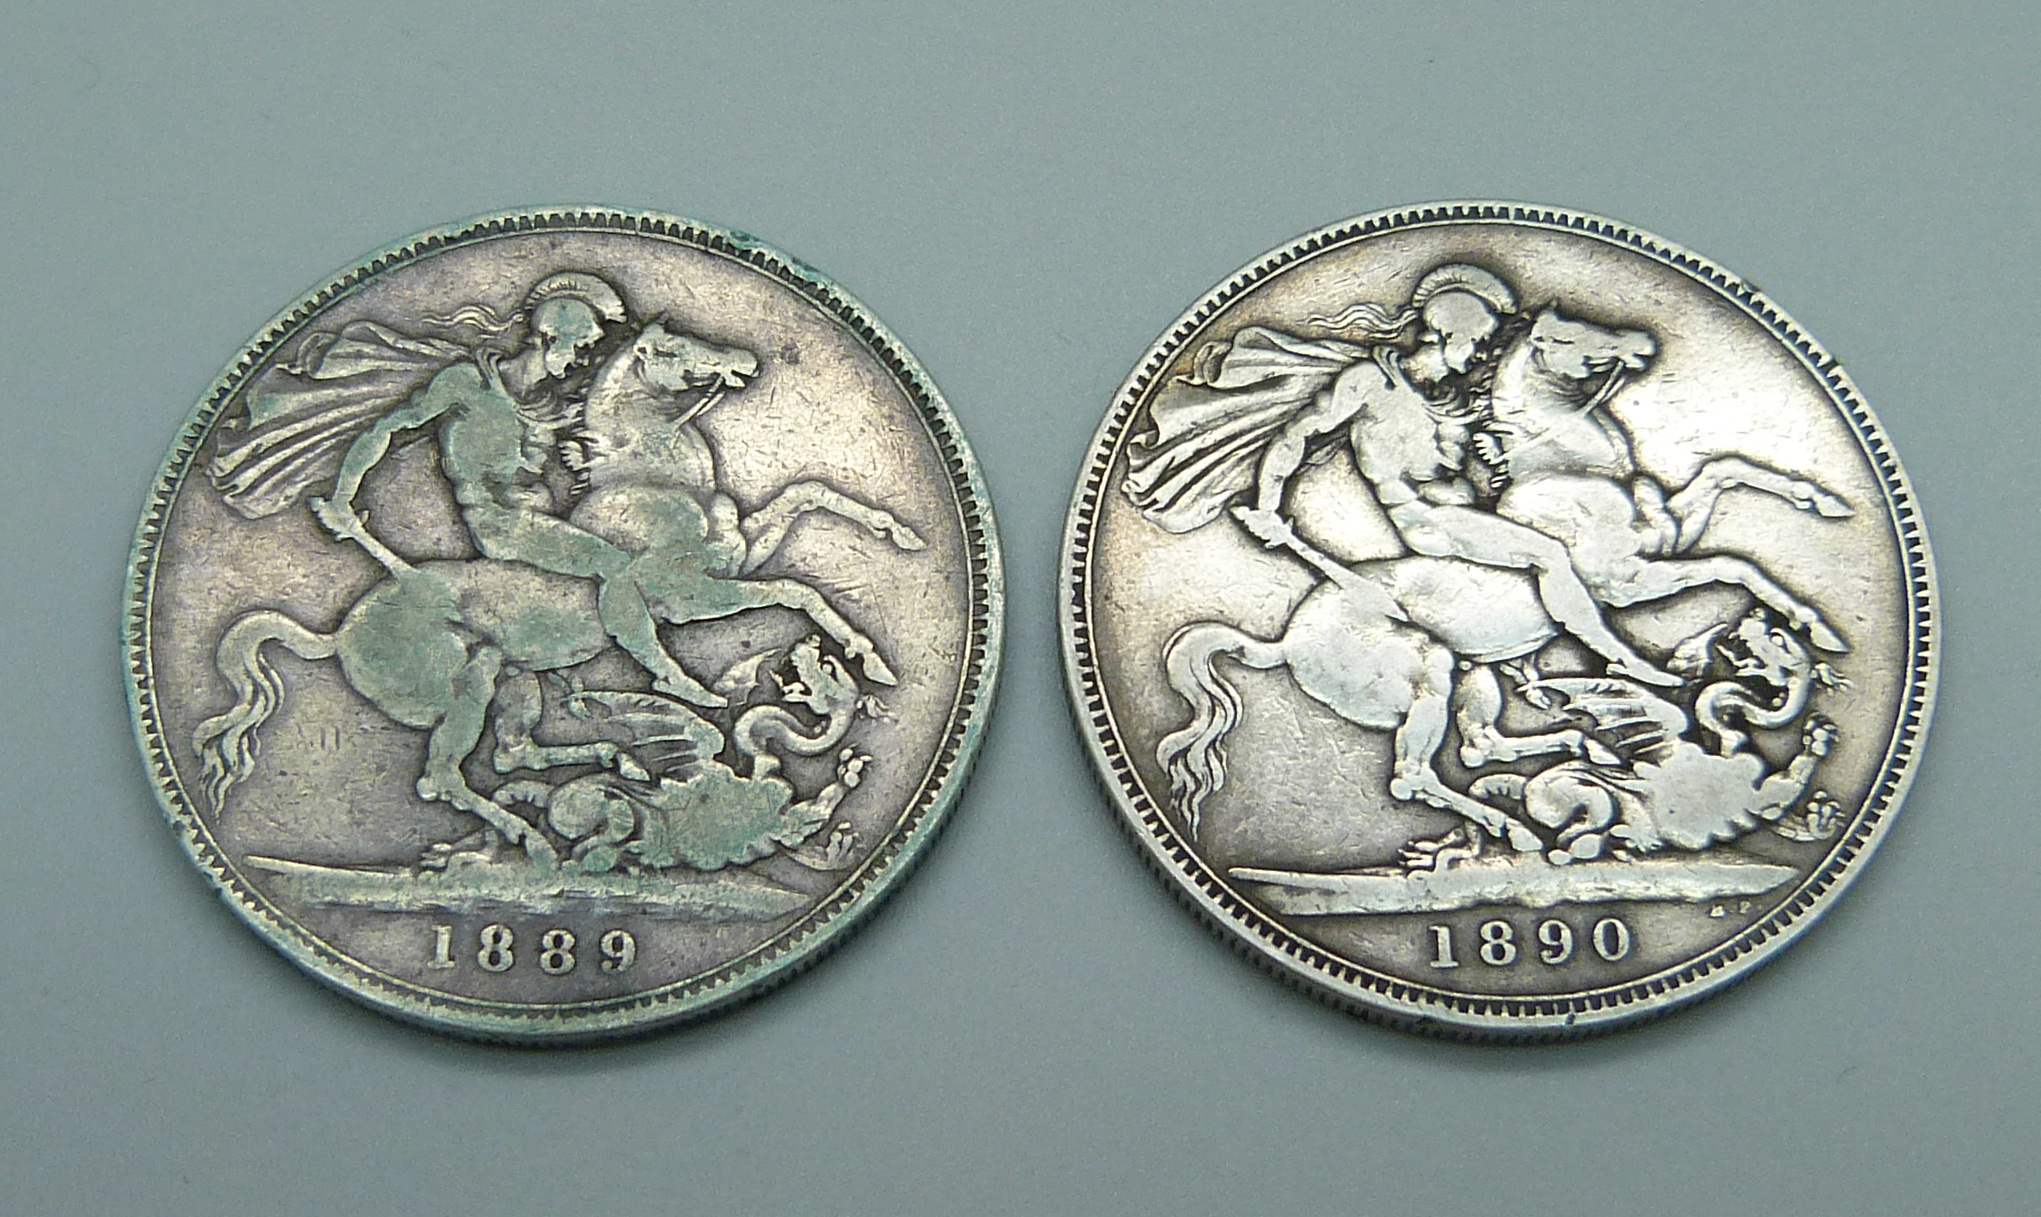 Two Victorian crowns, 1889 and 1890